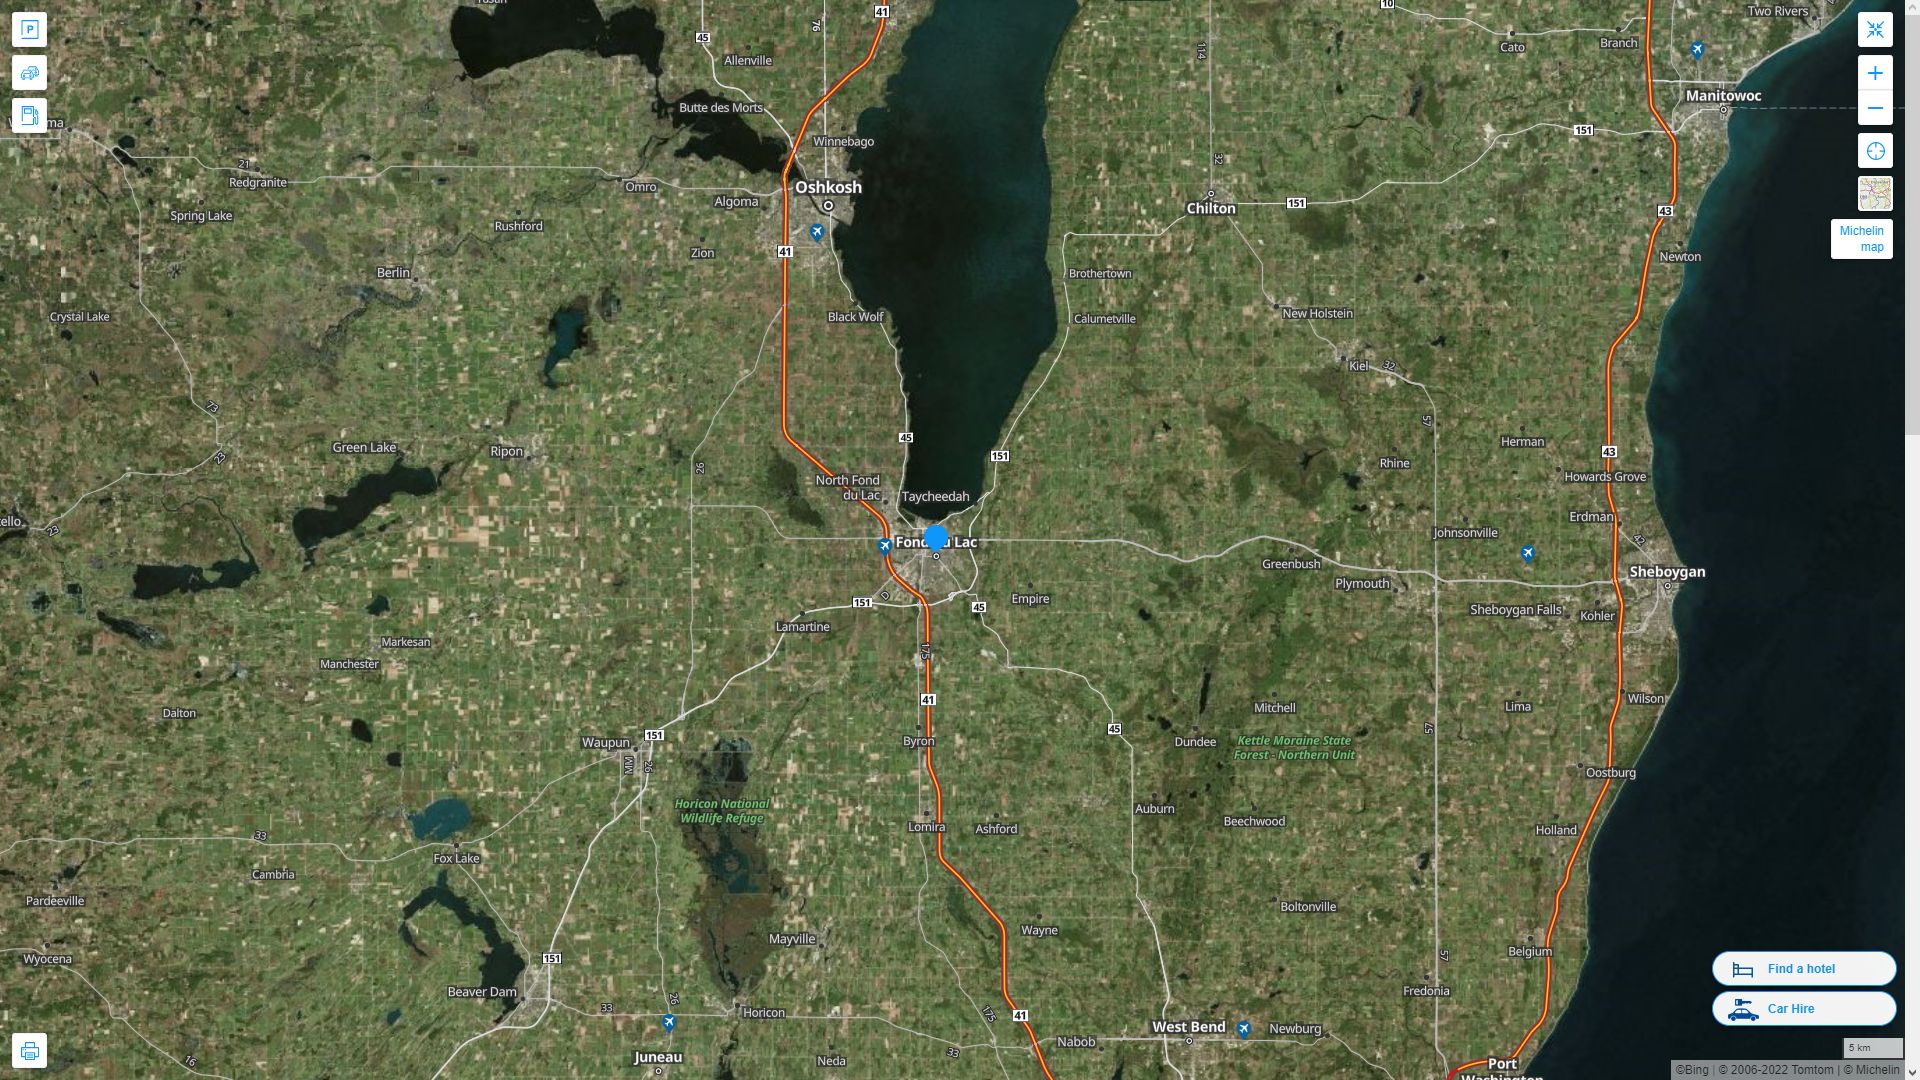 Fond du Lac Wisconsin Highway and Road Map with Satellite View